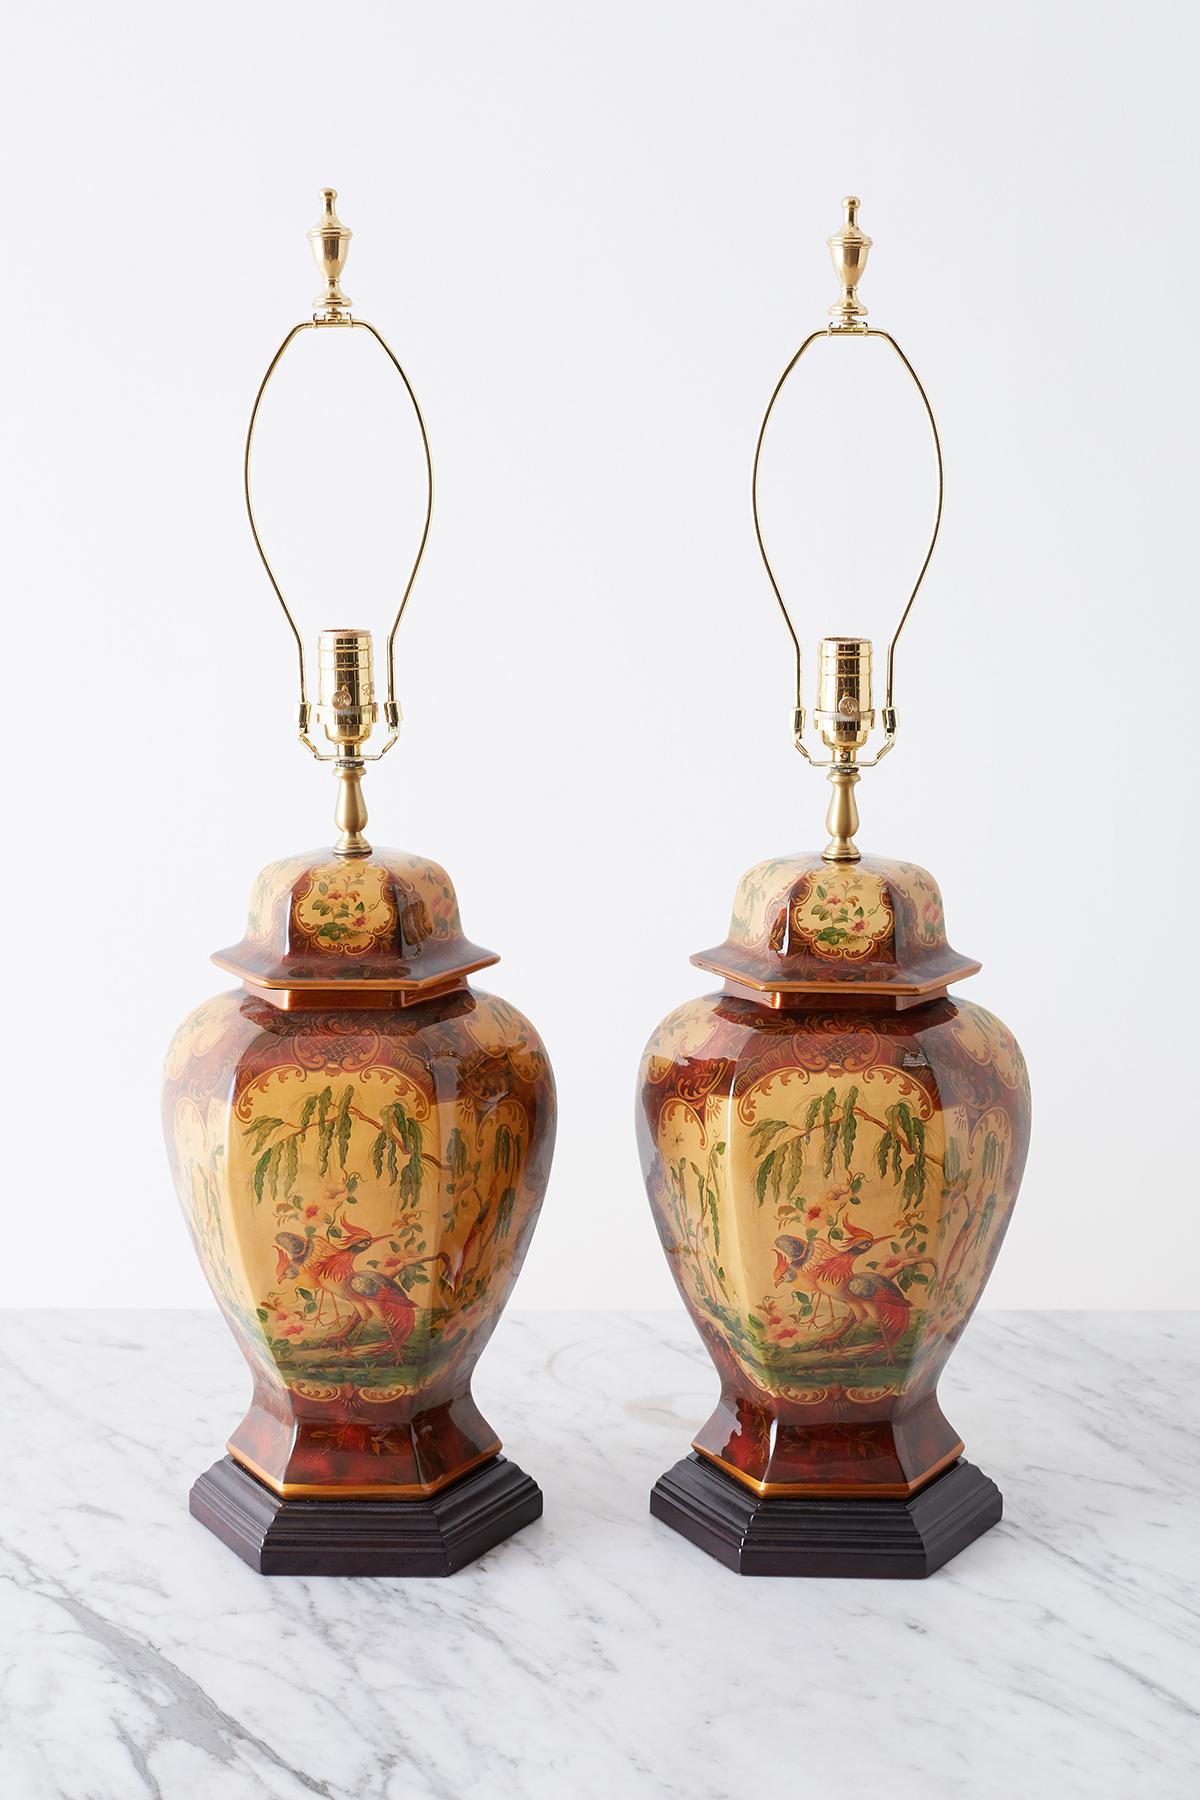 Exceptional pair of chinoiserie glazed ginger jar form table lamps by Bradburn Gallery. The jars having a hexagonal form with a conforming wood plinth. Each jar features beautifully decorated scenes with birds and trees. The urns are topped with